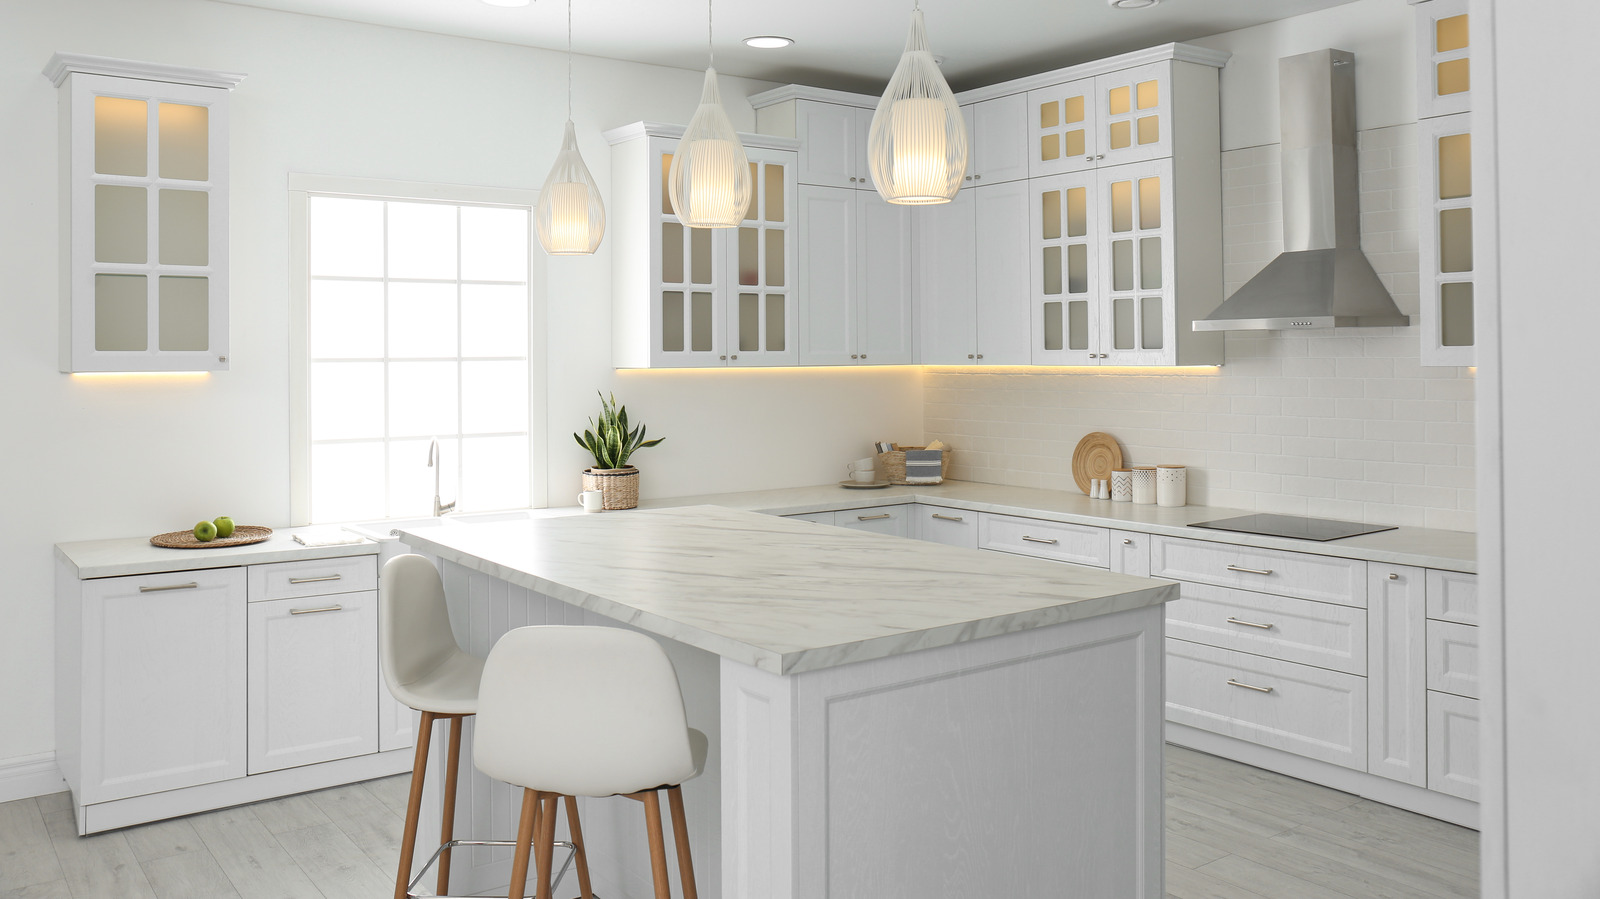 https://www.housedigest.com/img/gallery/21-small-kitchen-islands-that-dont-eat-up-square-footage/l-intro-1653309745.jpg